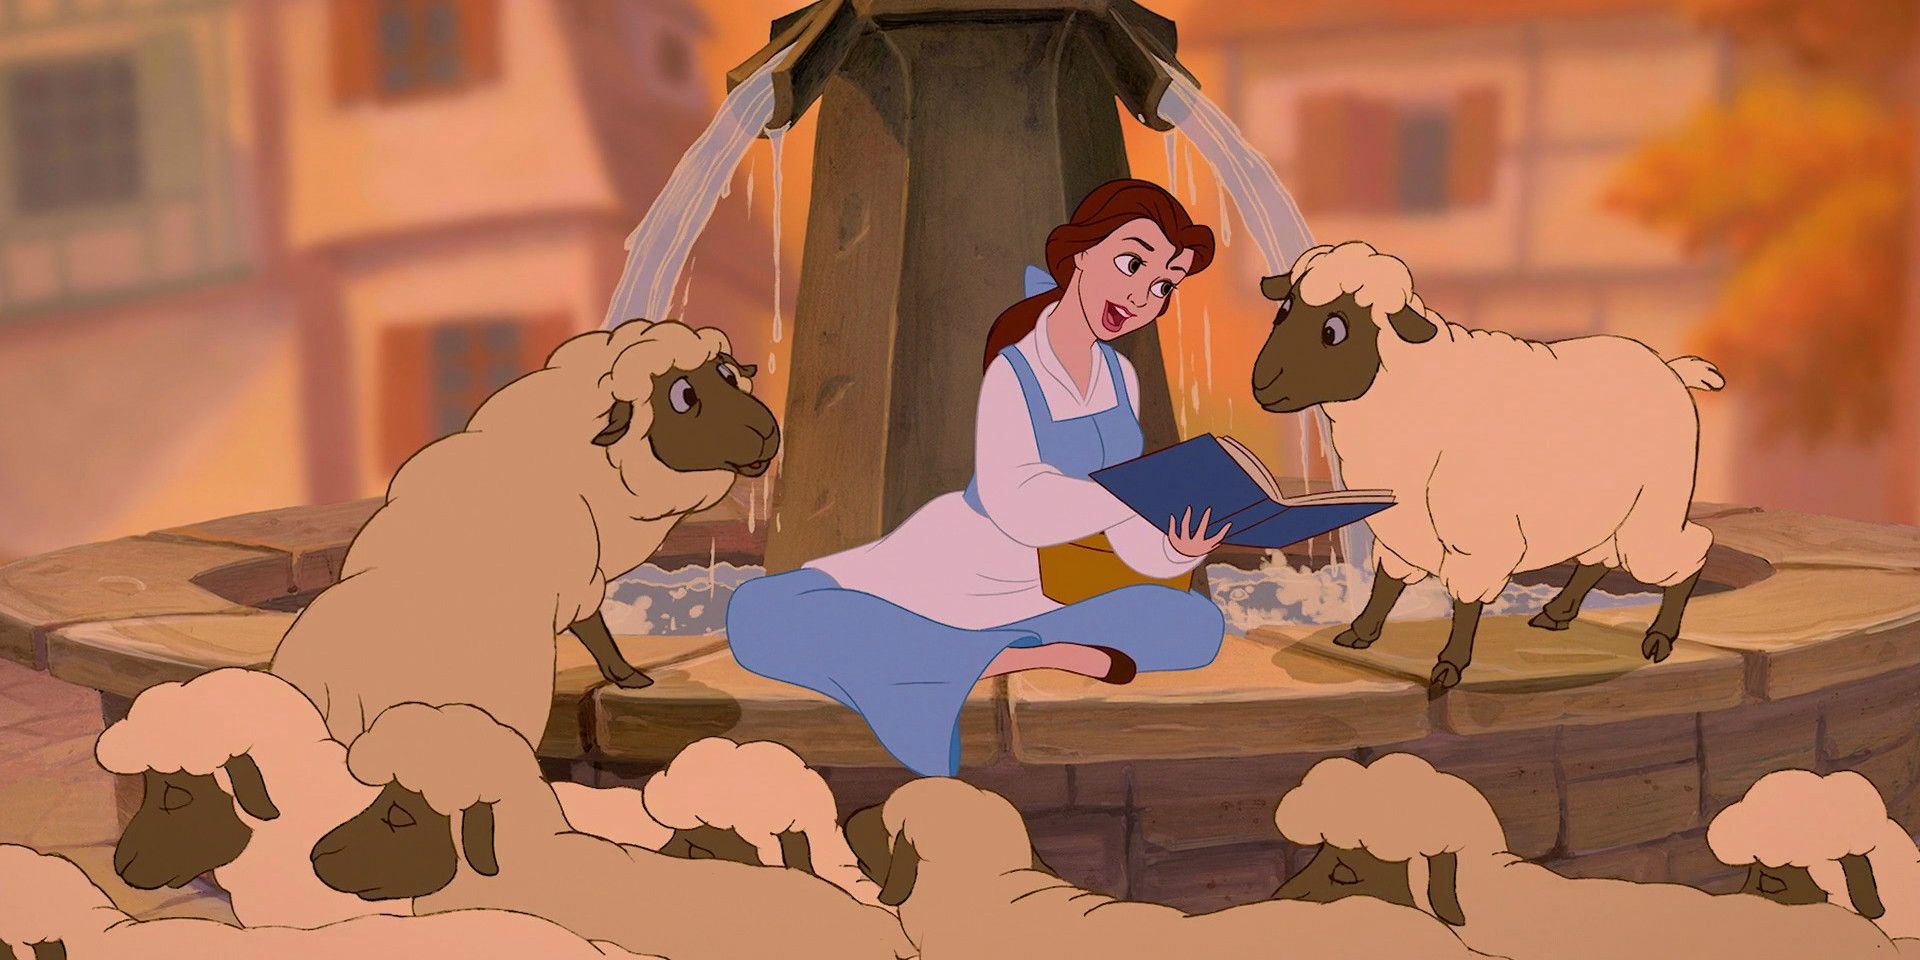 Disney All the Disney Princesses Ranked By Their Independence